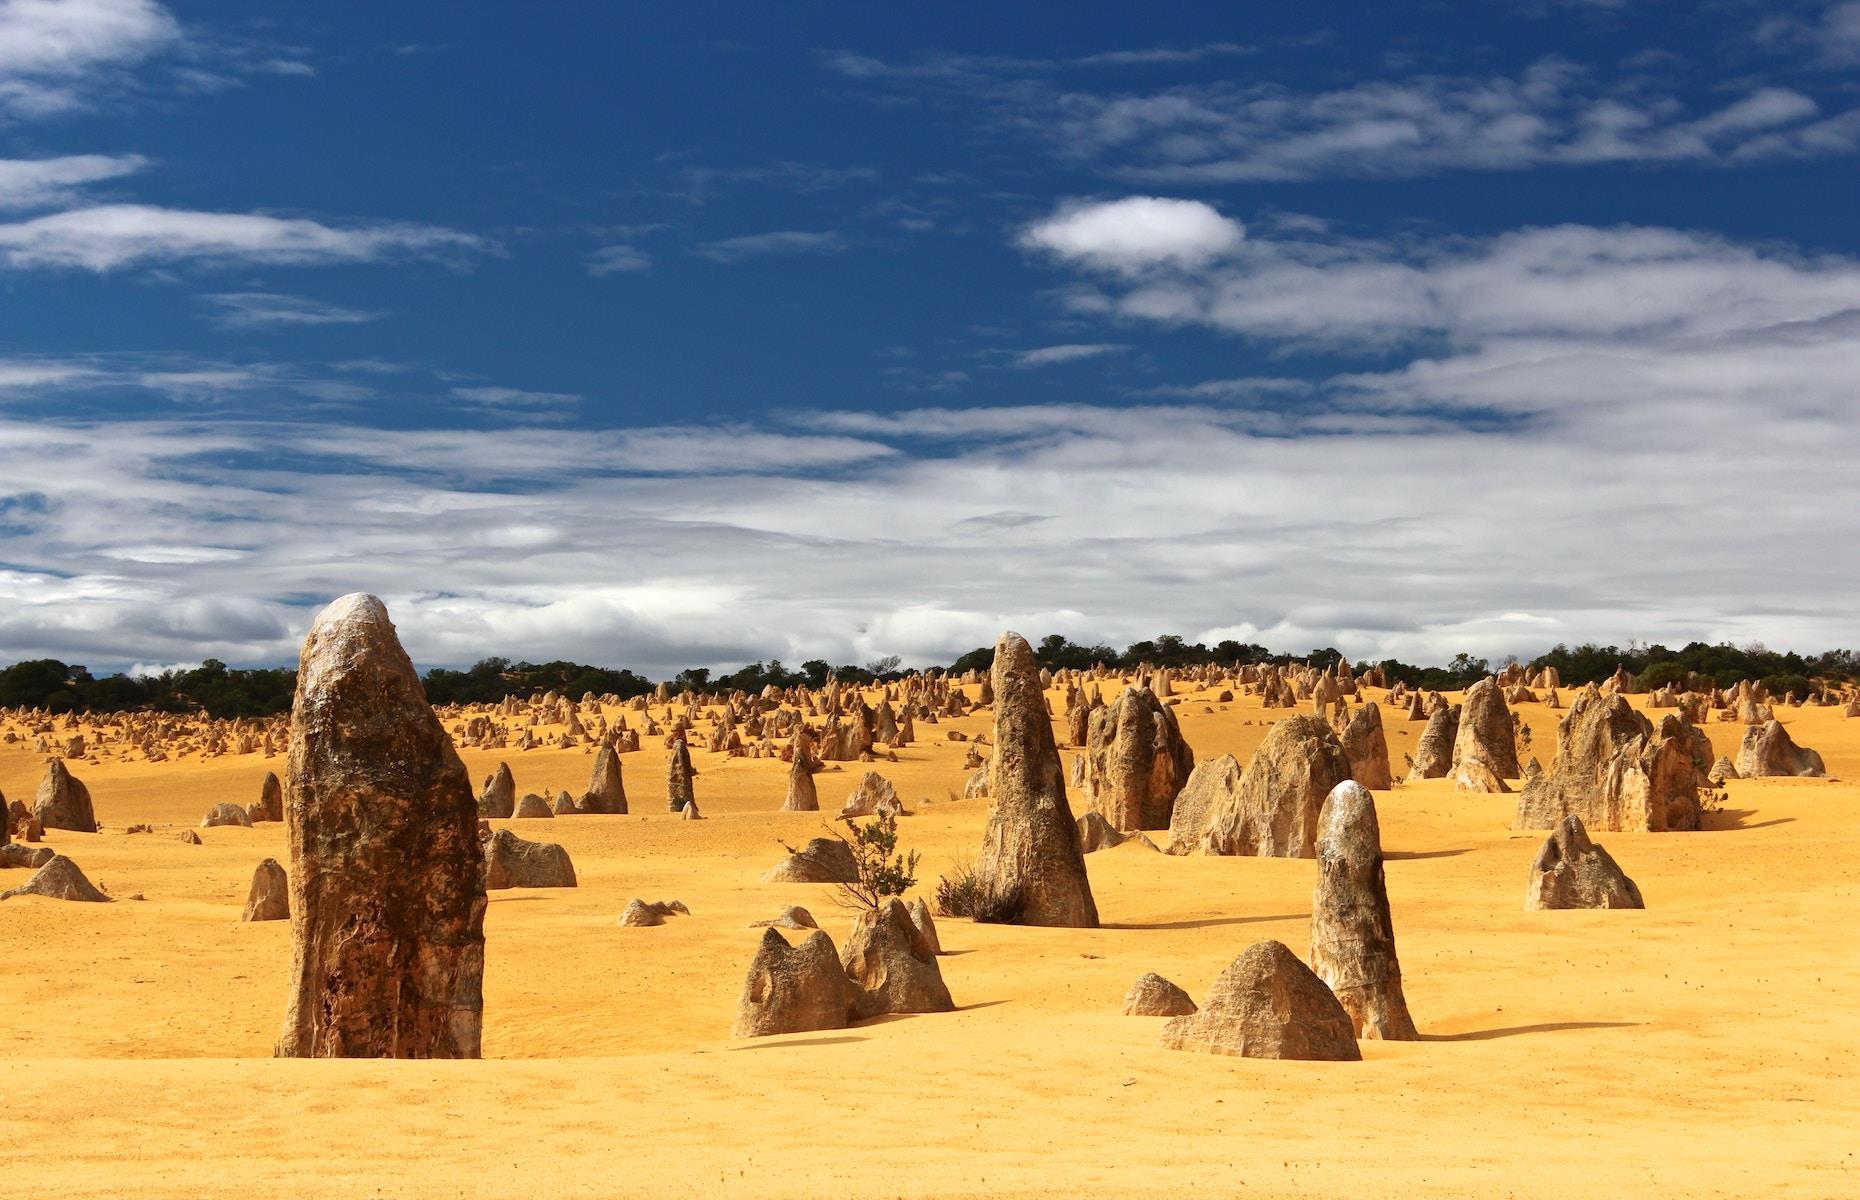 These surreal lunar-like limestone formations, known as the Pinnacles in Nambung National Park, are even more mesmerizing in the flesh. Reaching up to 5m (16ft) high, thousands of individual formations are dotted among the desert sands as far as the eye can see. While they are entirely natural, they look as if they were sculpted by hand. It’s not surprising that when they were first discovered by Europeans it was thought they belonged to a lost city.